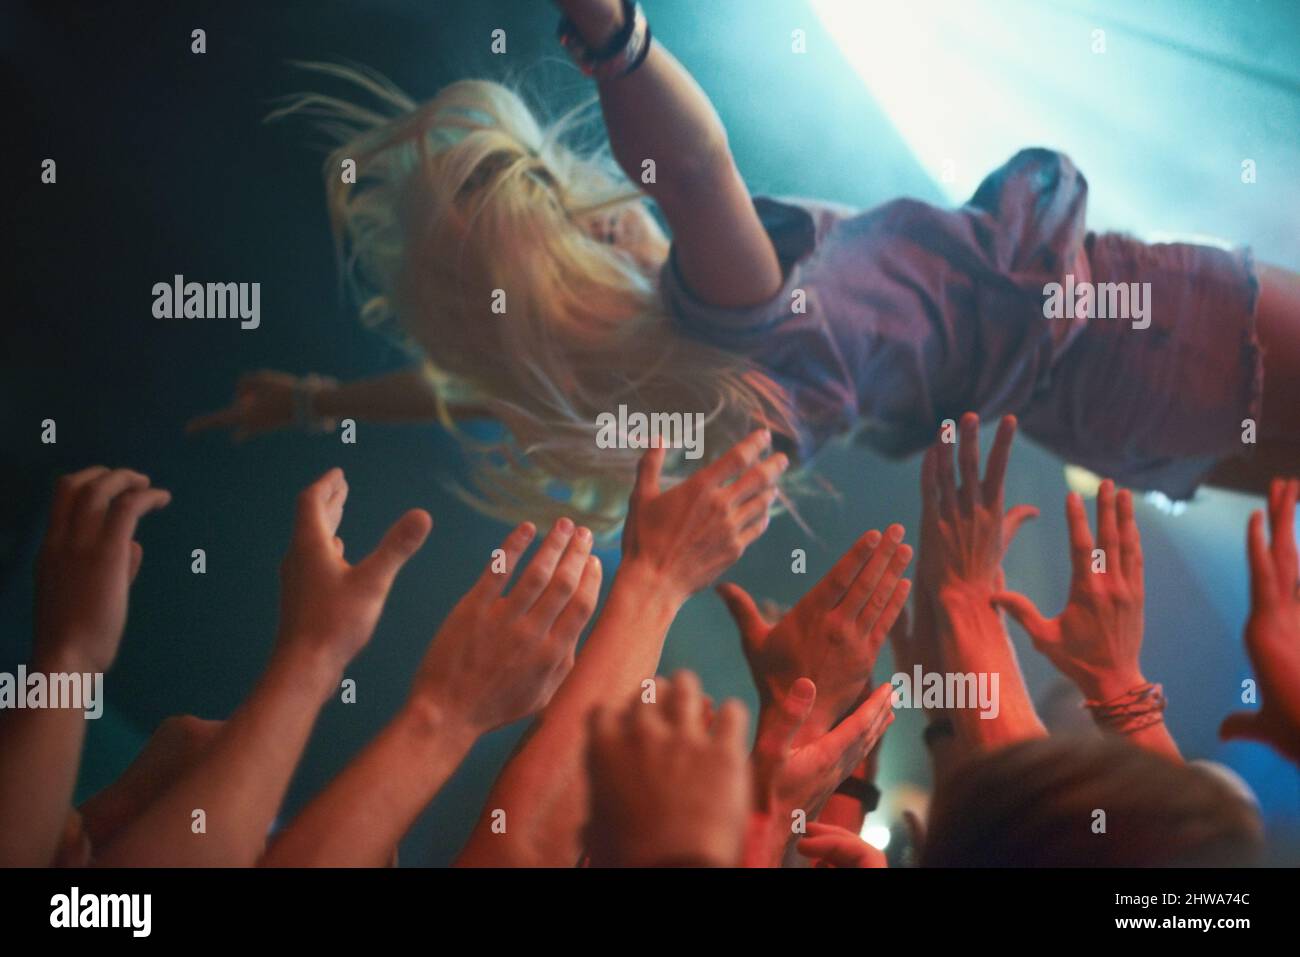 Surfing on a wave of fans. A young woman crowd-surfing at a concert. Stock Photo